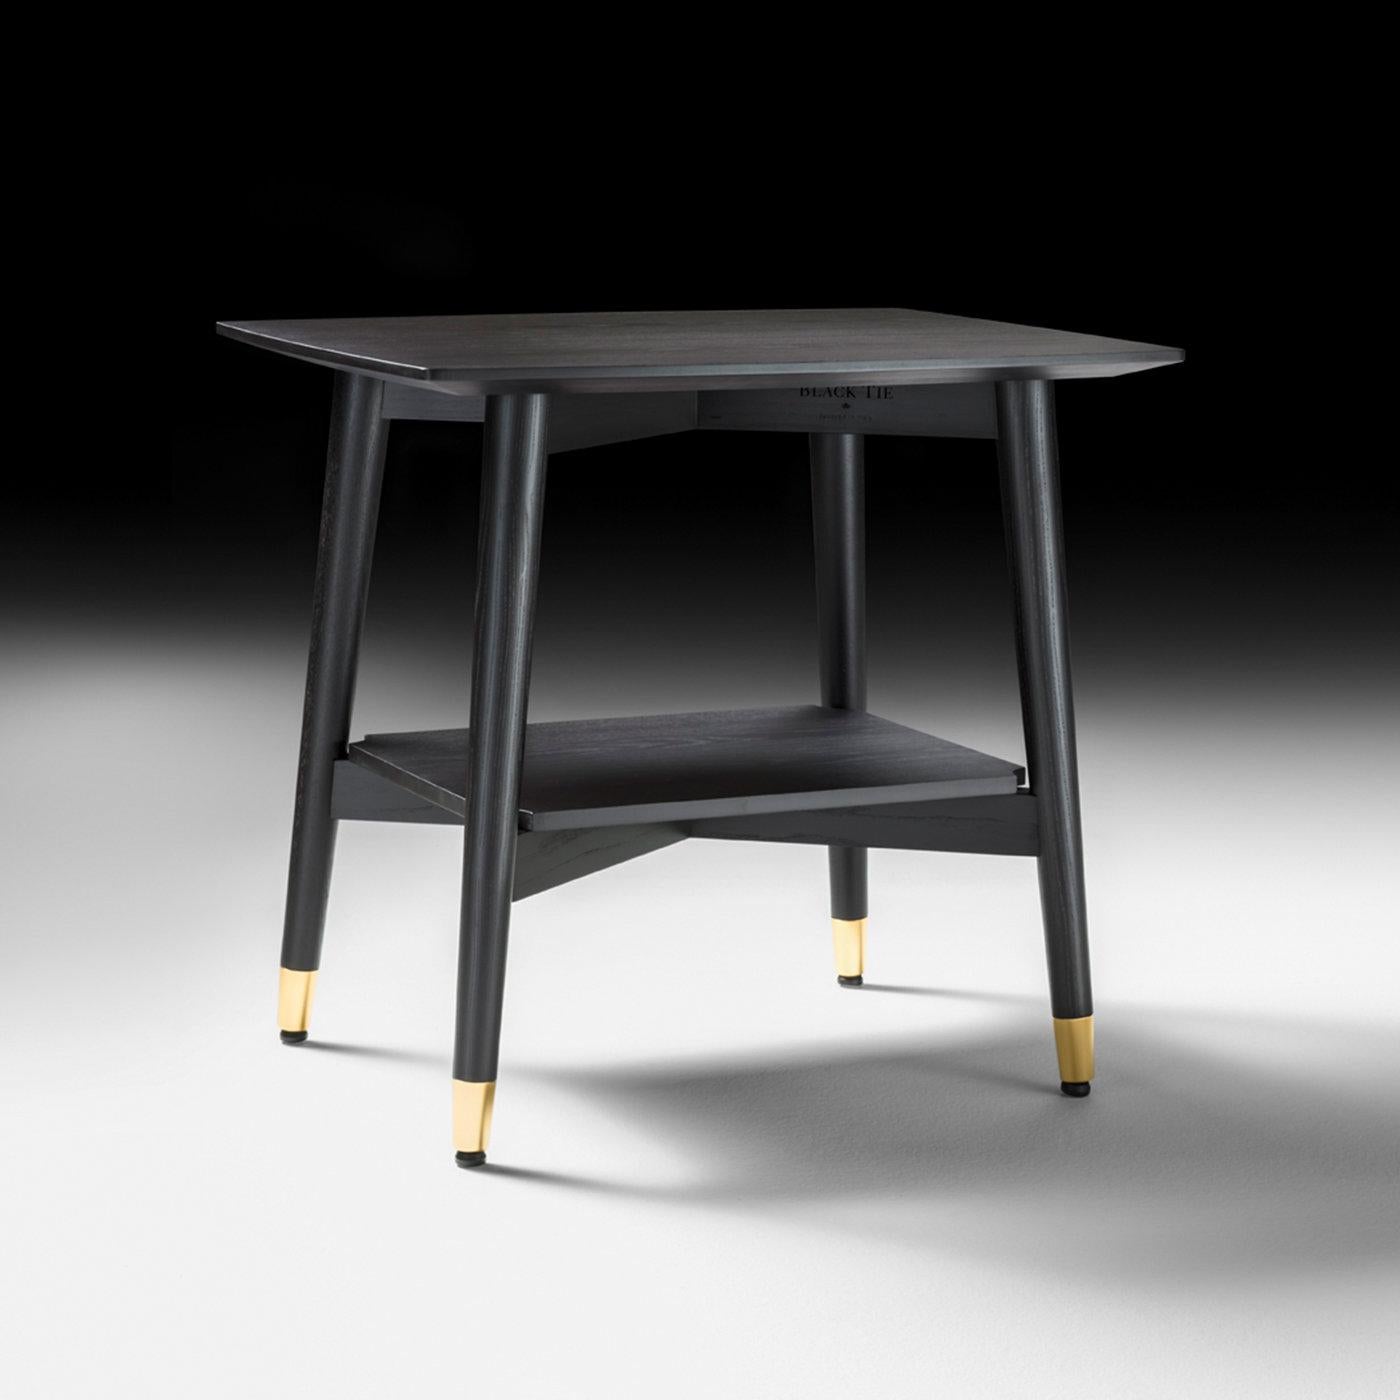 This side table will be an exquisite addition next to a classic and refined bed. It features a structure made of ash wood with MDF top and lower shelf, boasting mocha-lacquered finish. The feet are enriched with a metal ferrules with a polished gold